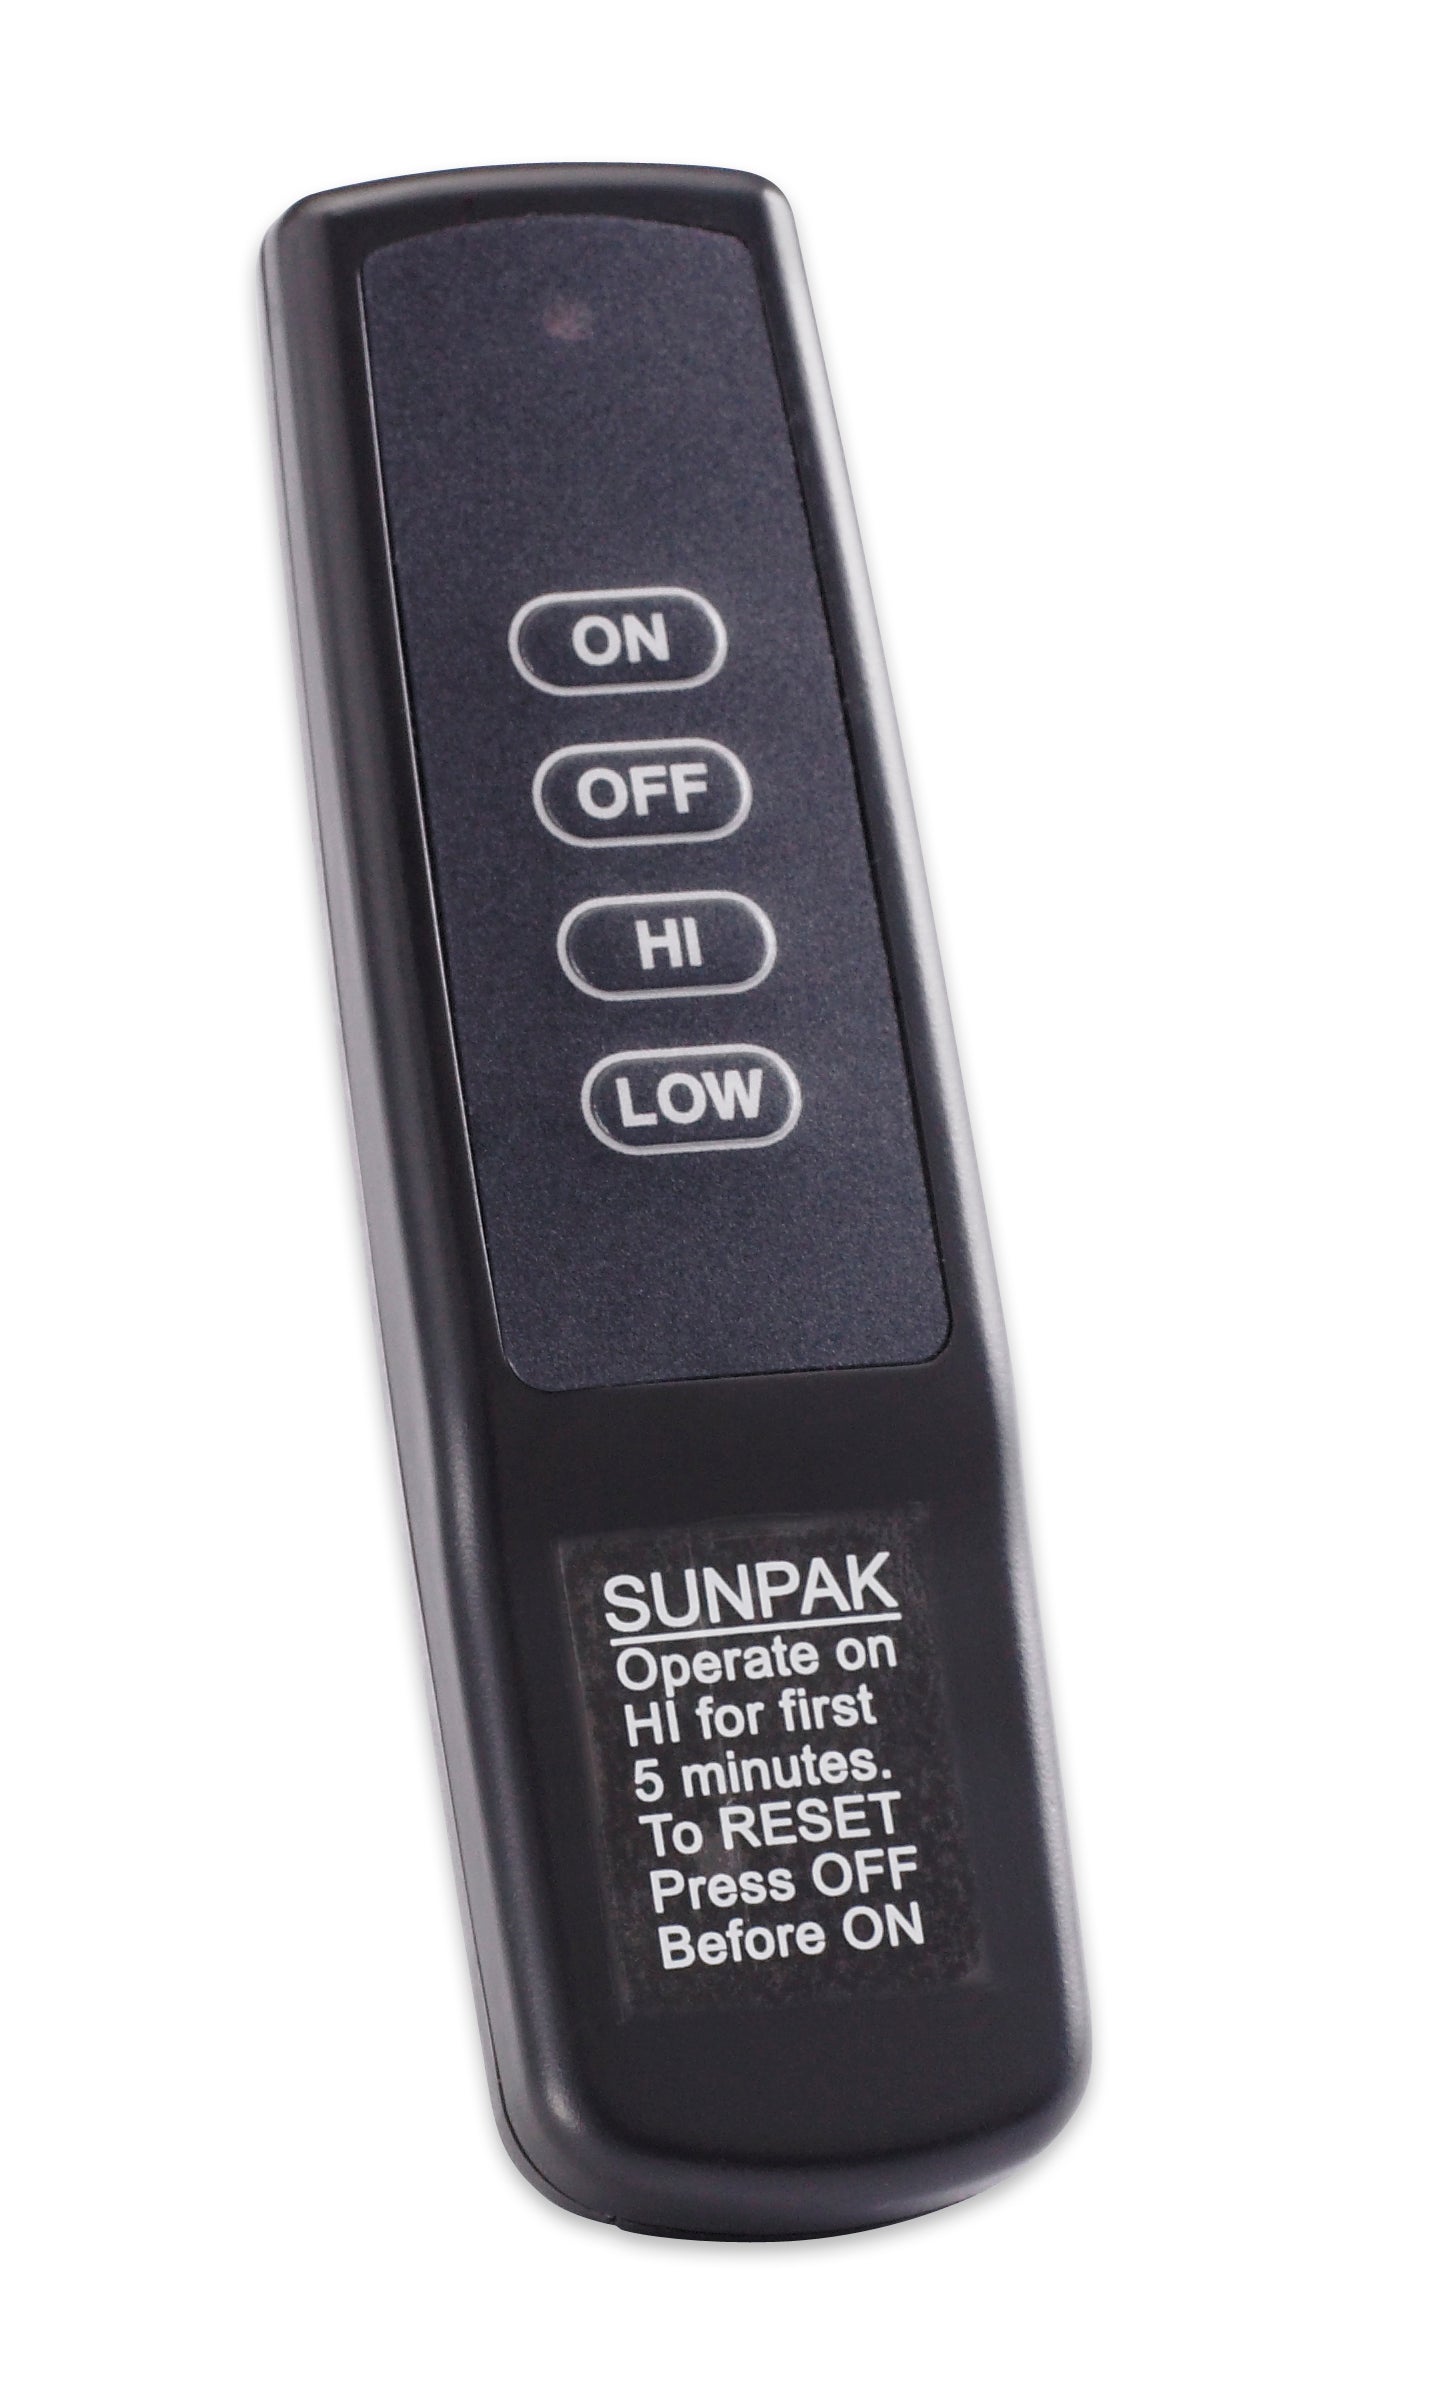 Sunpak Two Stage Infrared Patio Heater Electric Ignition -S34 TSR Black- Remote